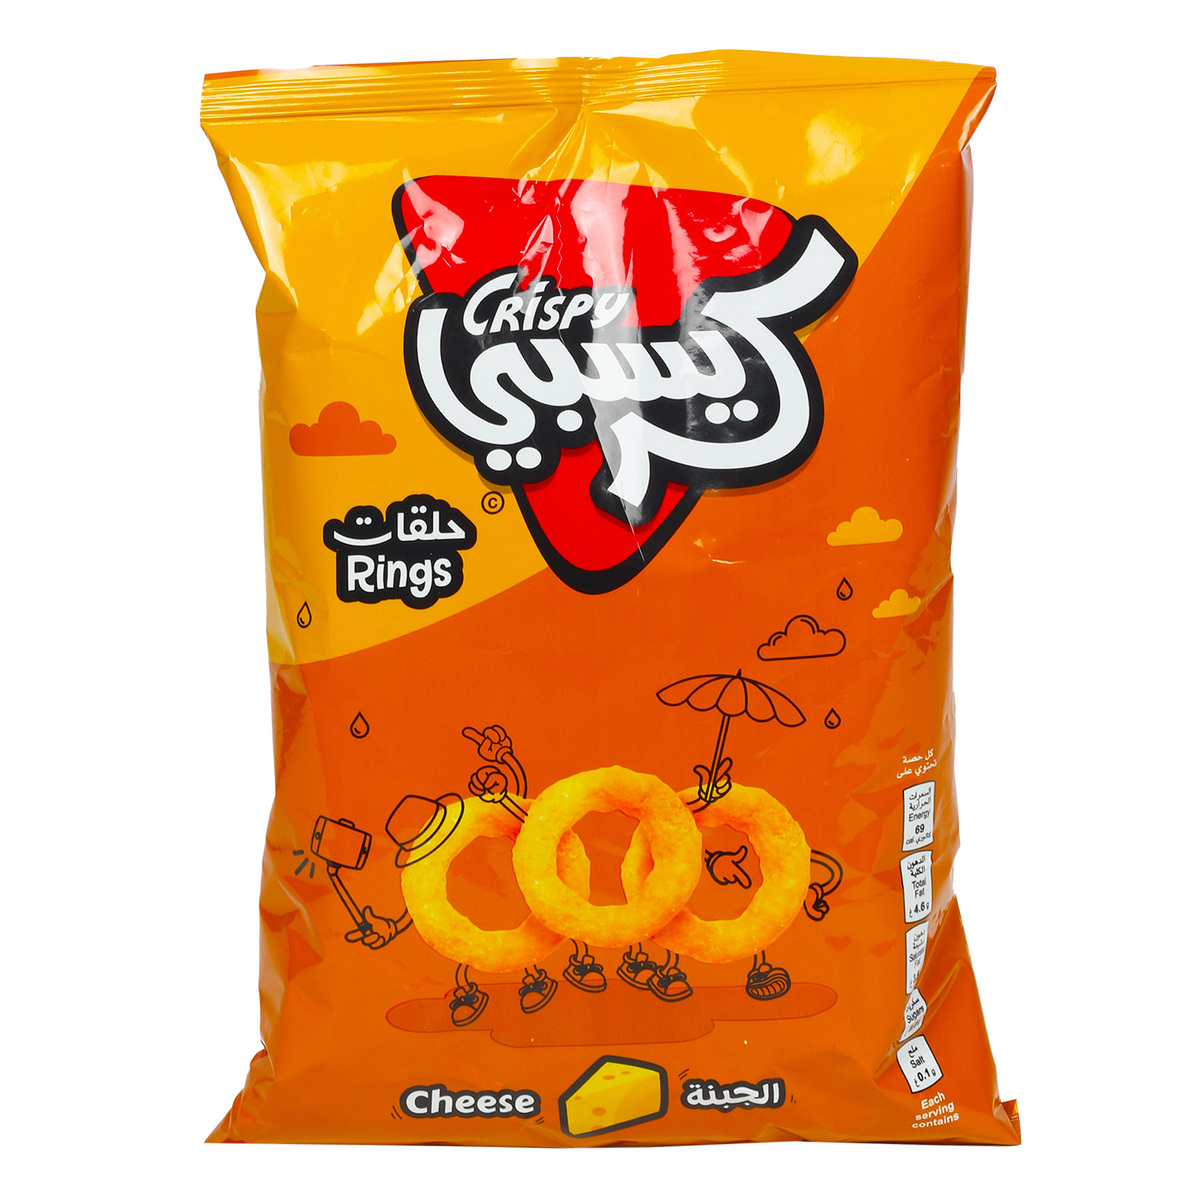 Crispy Super Rings Cheese Flavor Corn Chips 90 g